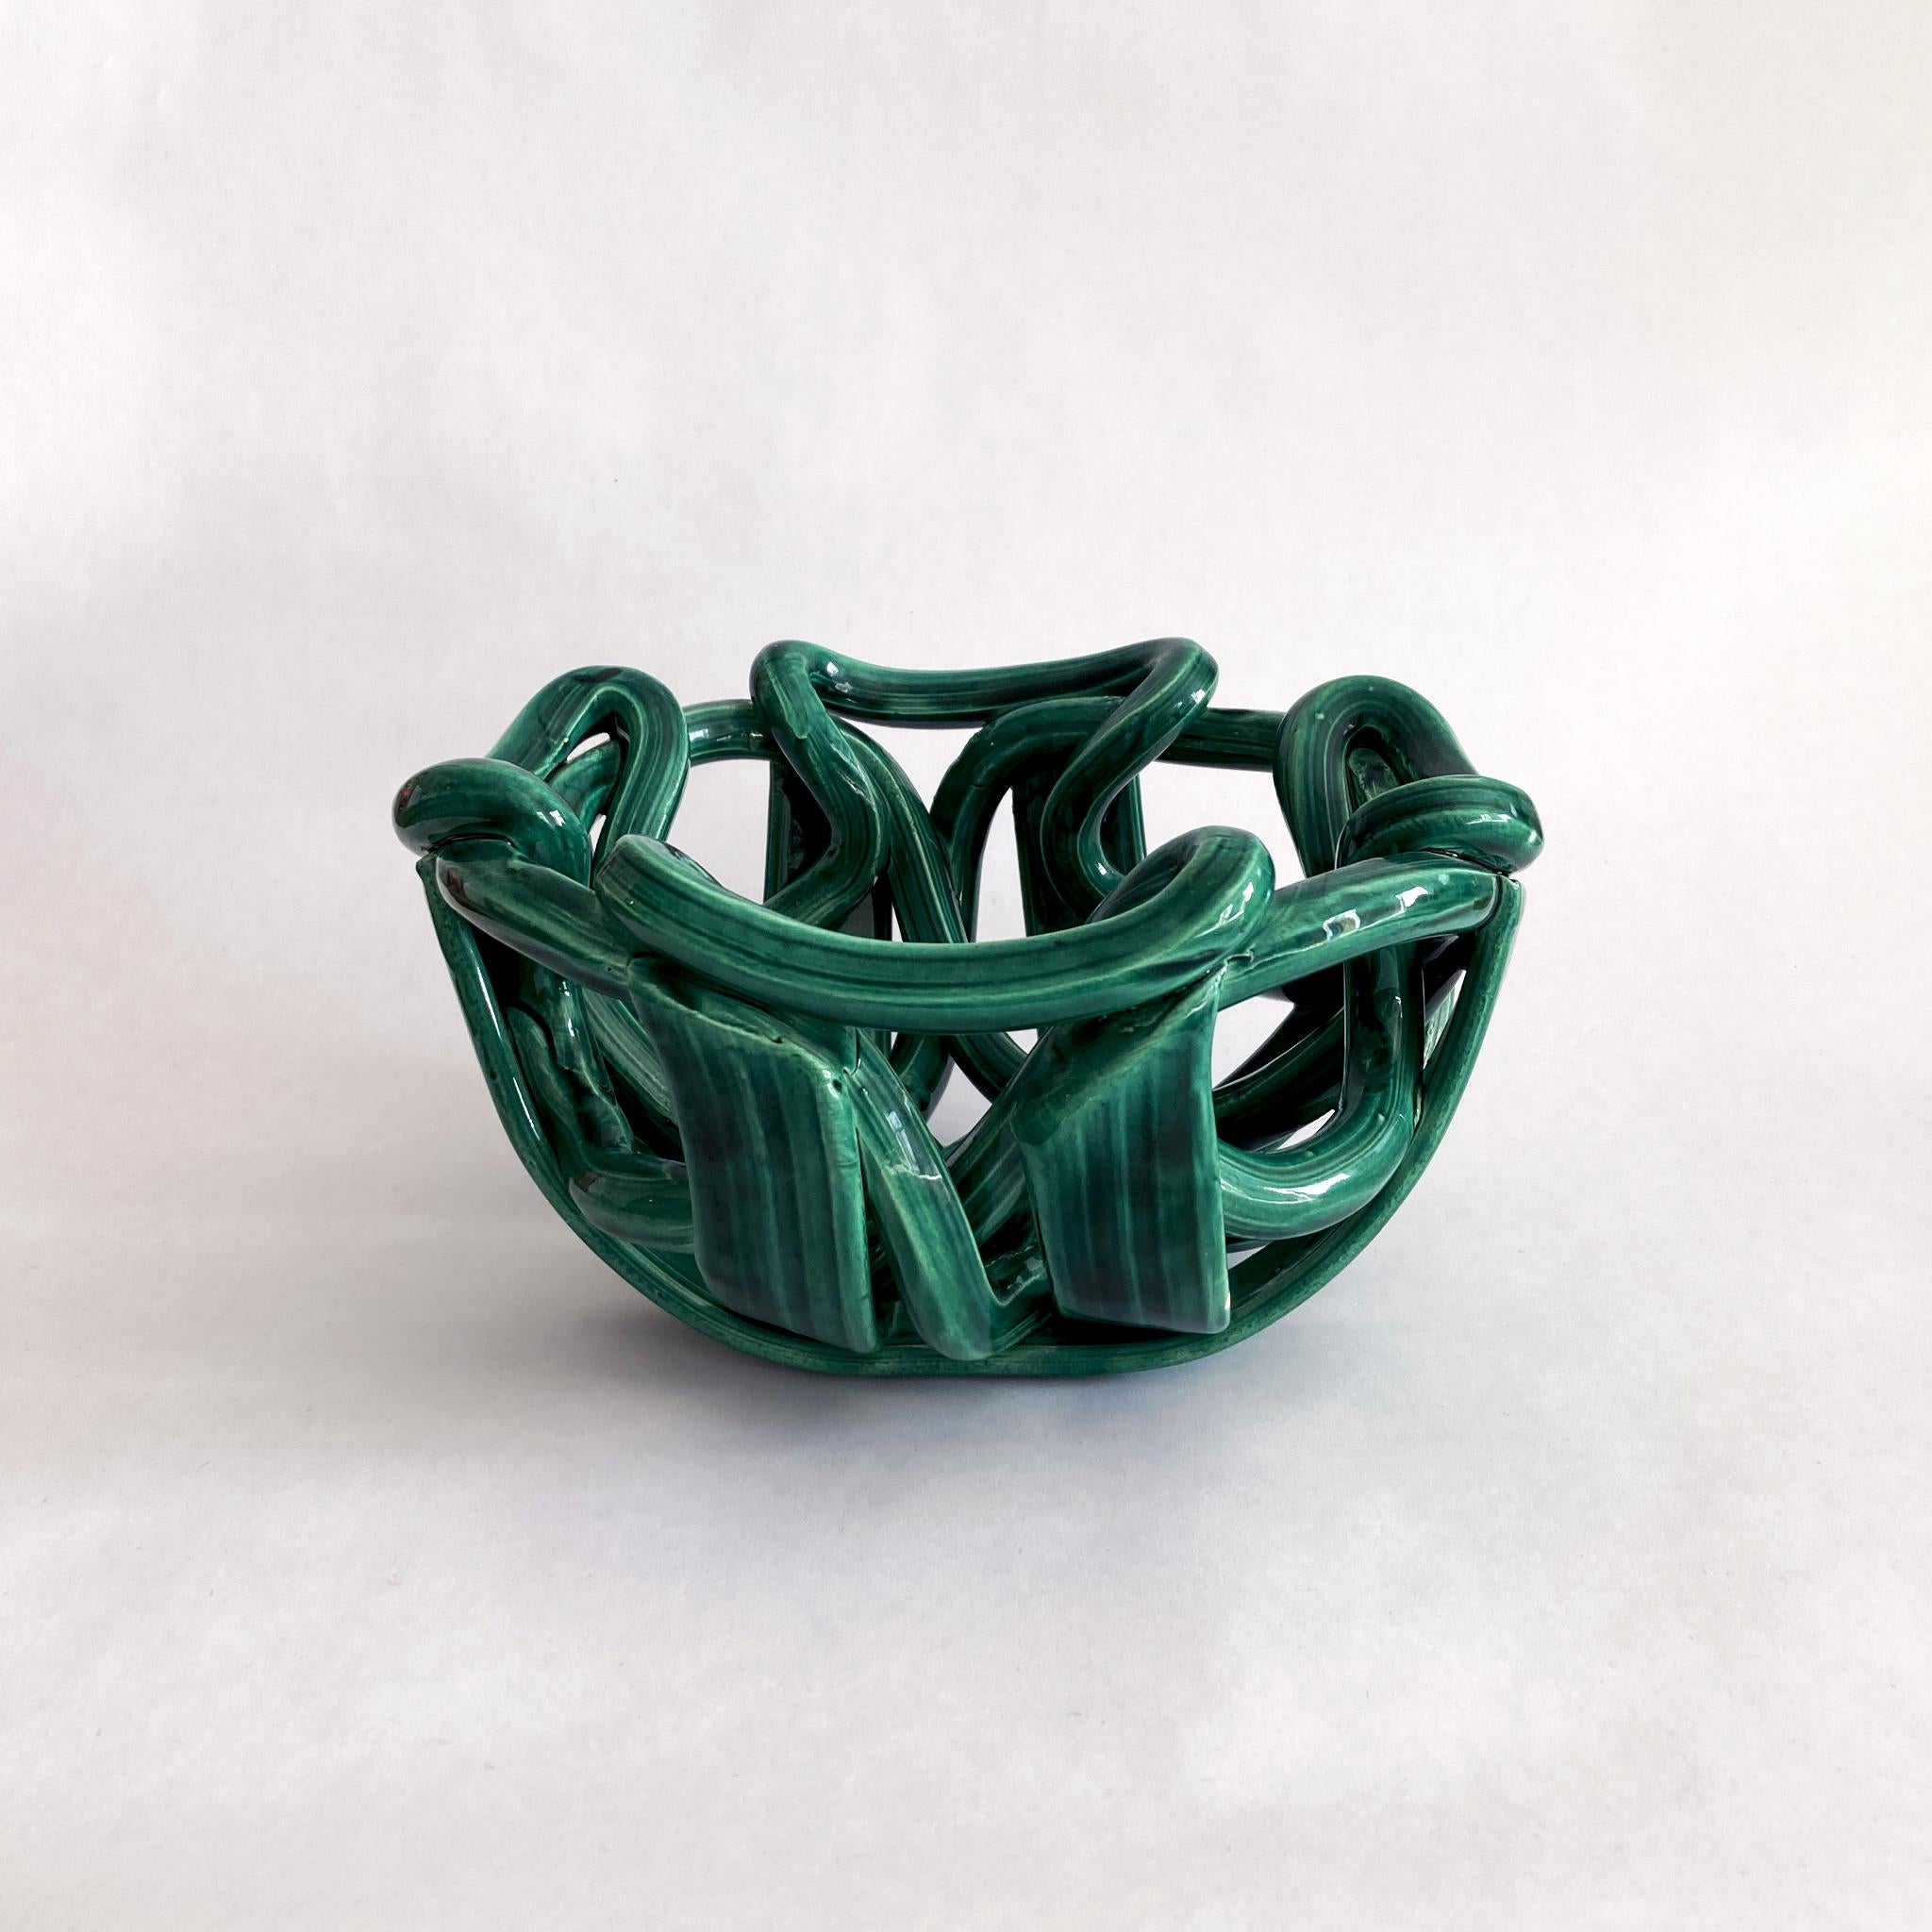 Stunning woven braided ceramic centerpiece bowl glazed in a wonderful shade of green. Great size for a coffee table or entryway. Very unusual abstract shape, pleasing from every angle. Not signed. In good vintage condition, no cracks or crazing.